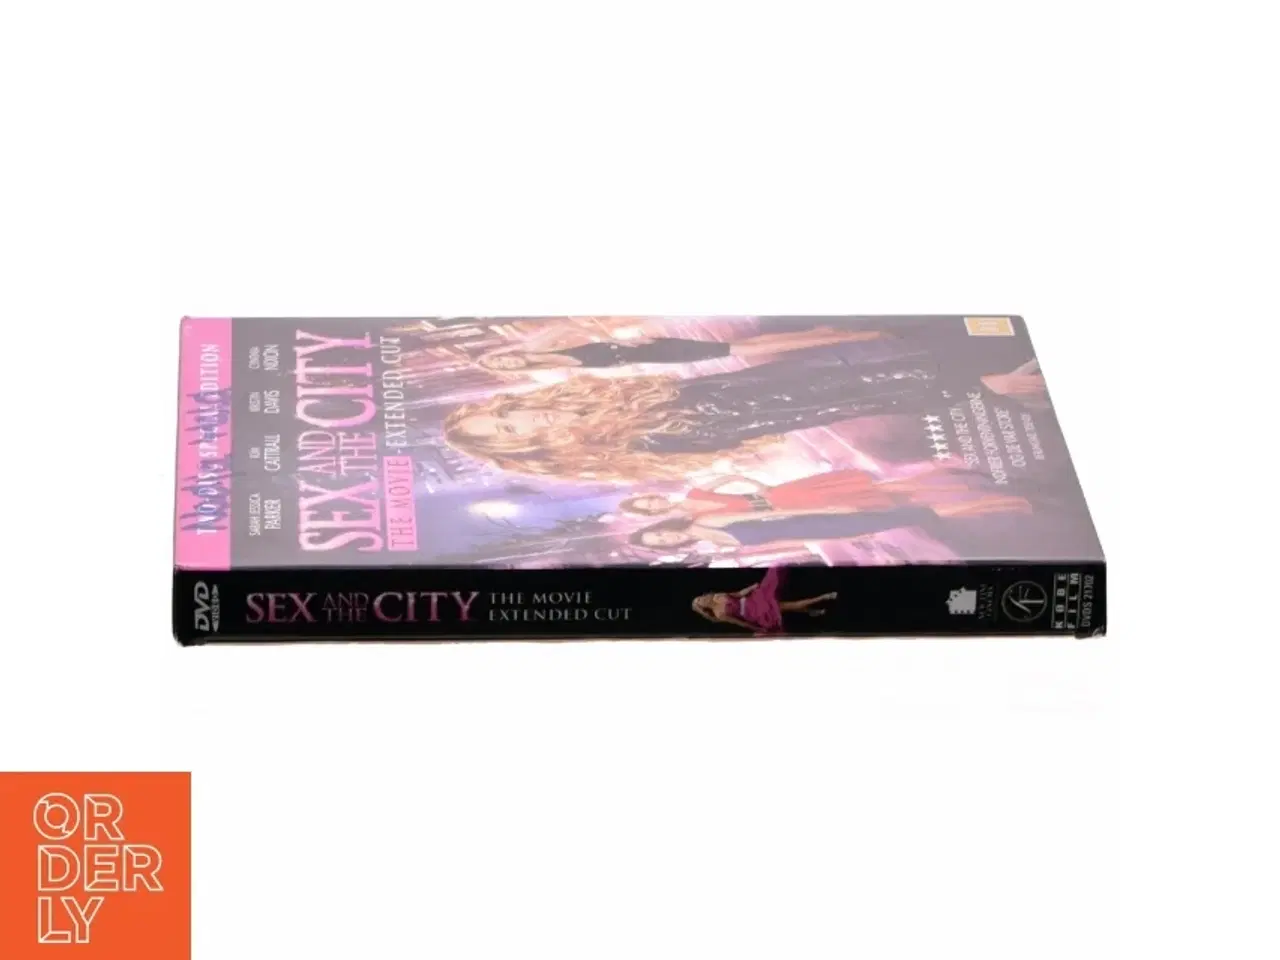 Billede 2 - Sex and the City (2disc Version)